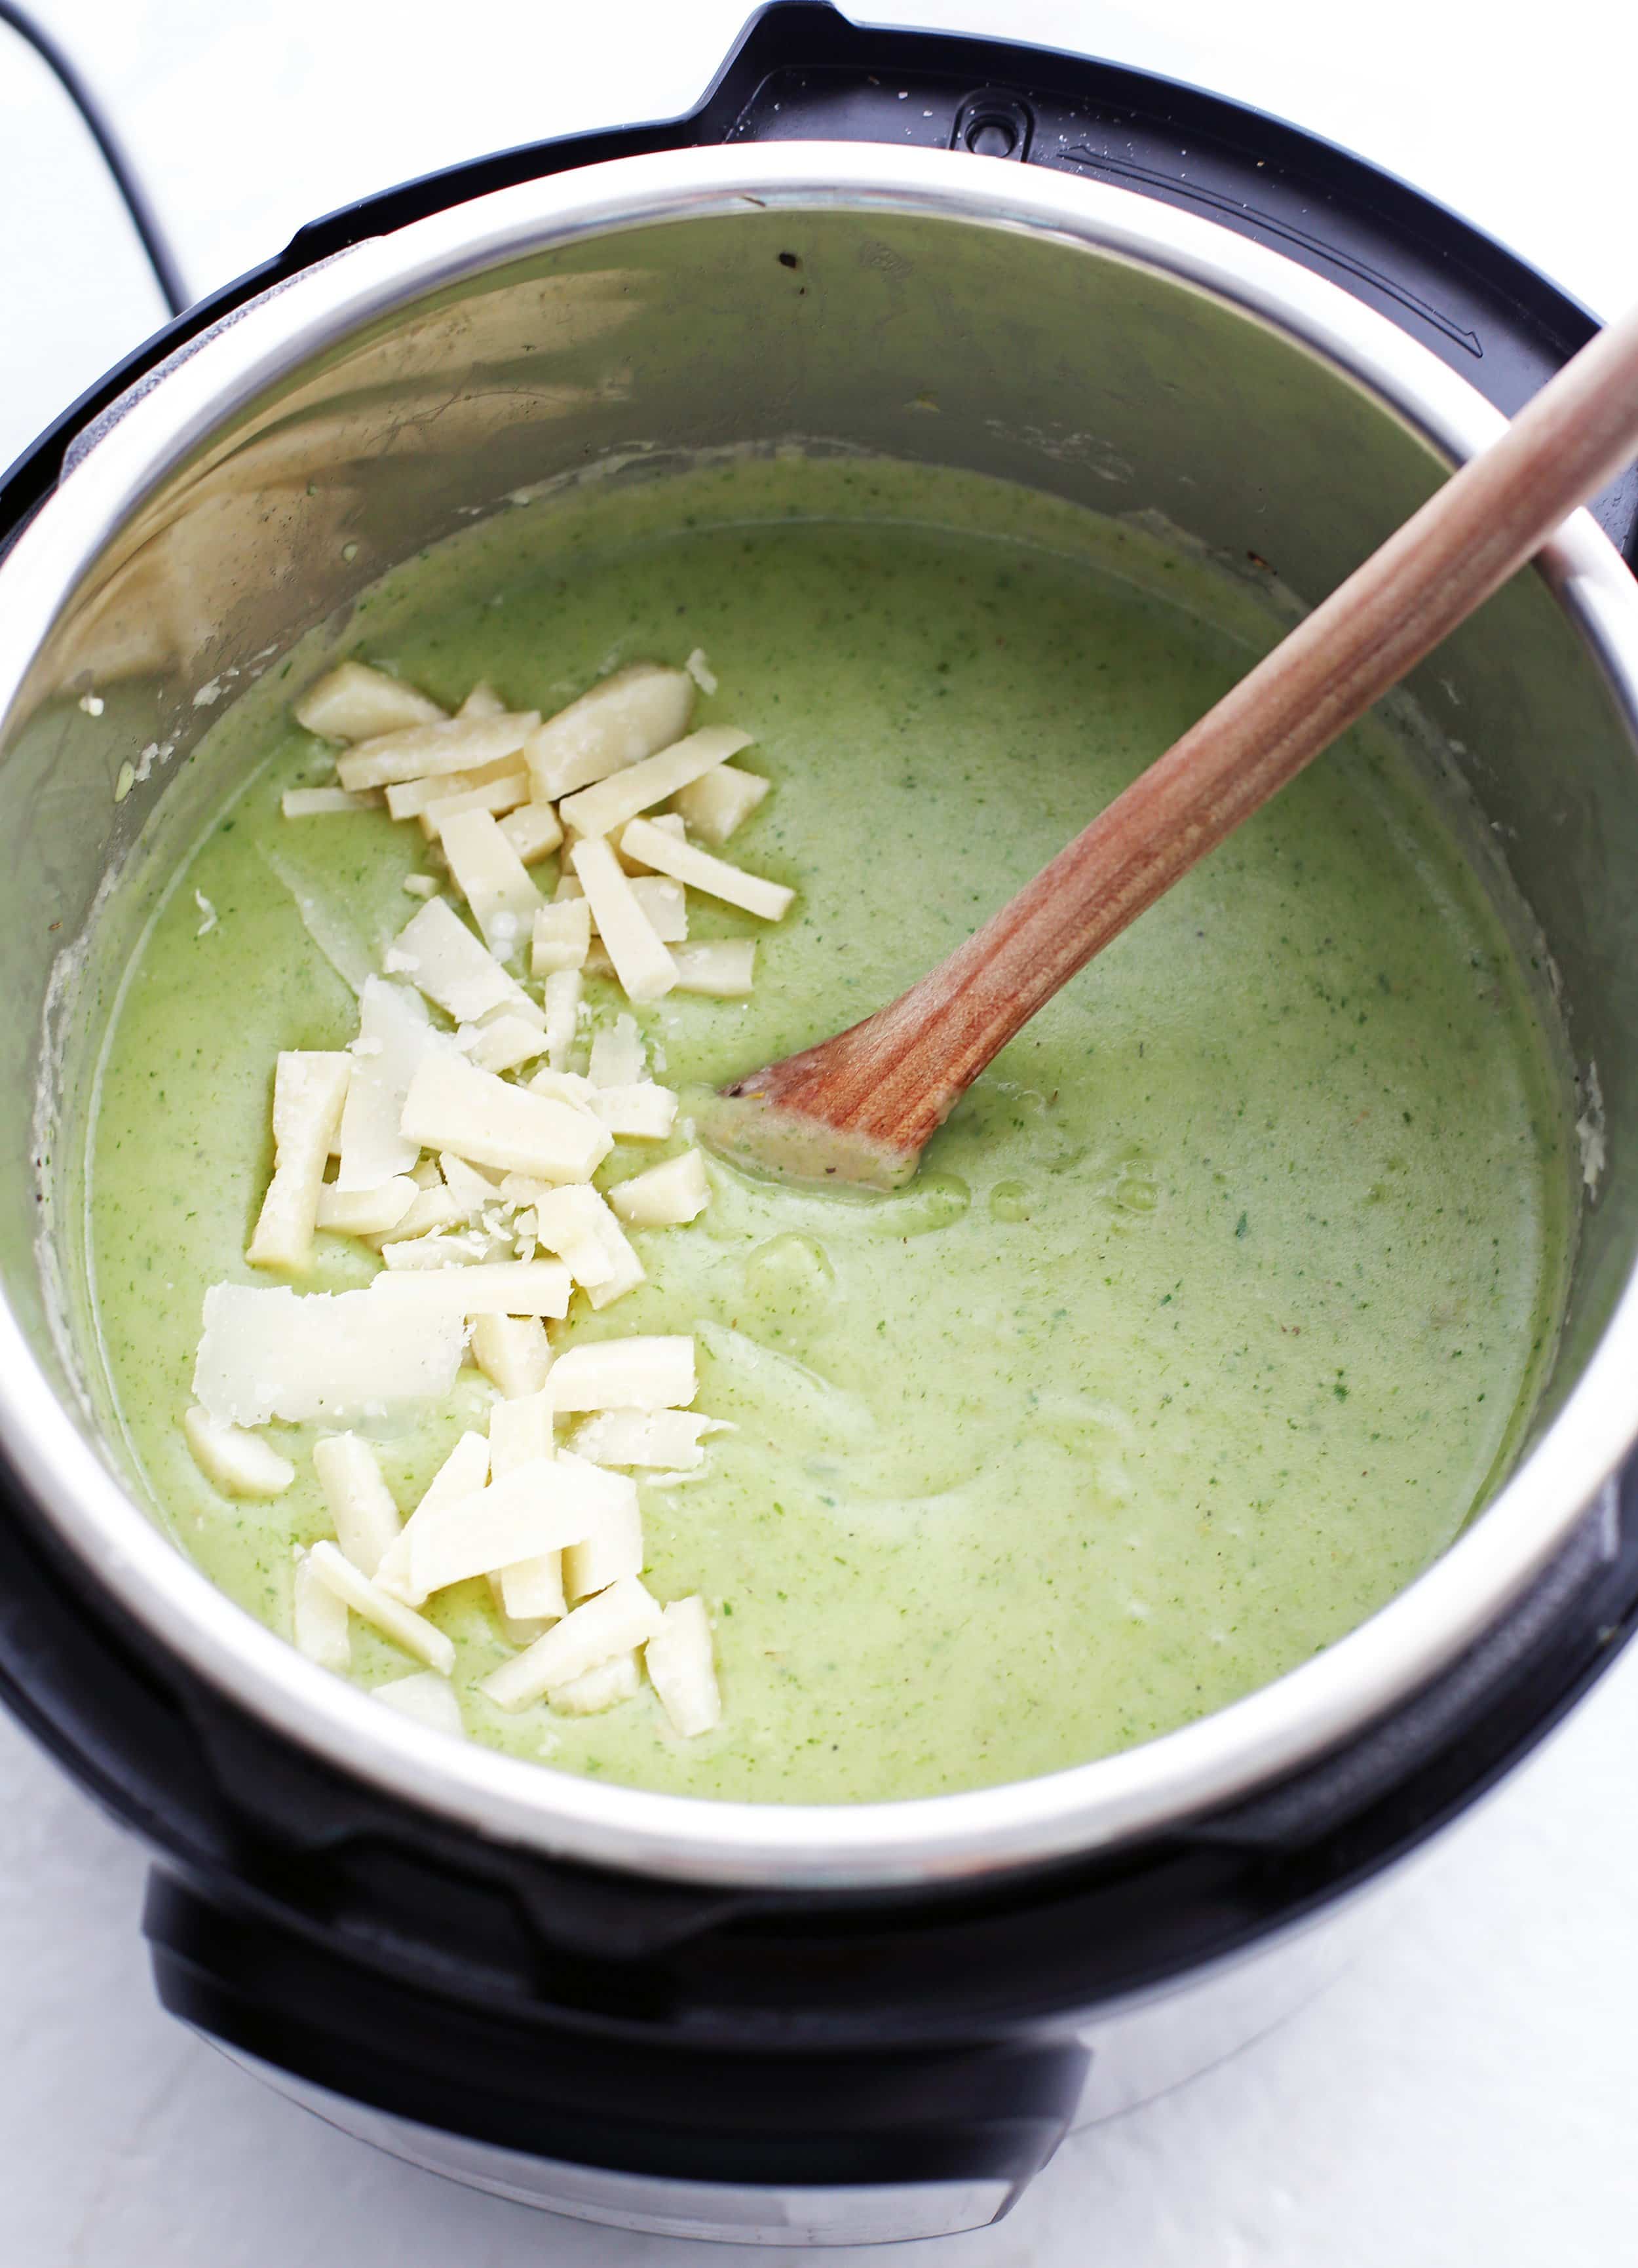 Creamy, light green Potato Leek Soup with Parmesan and Spinach in the Instant Pot.